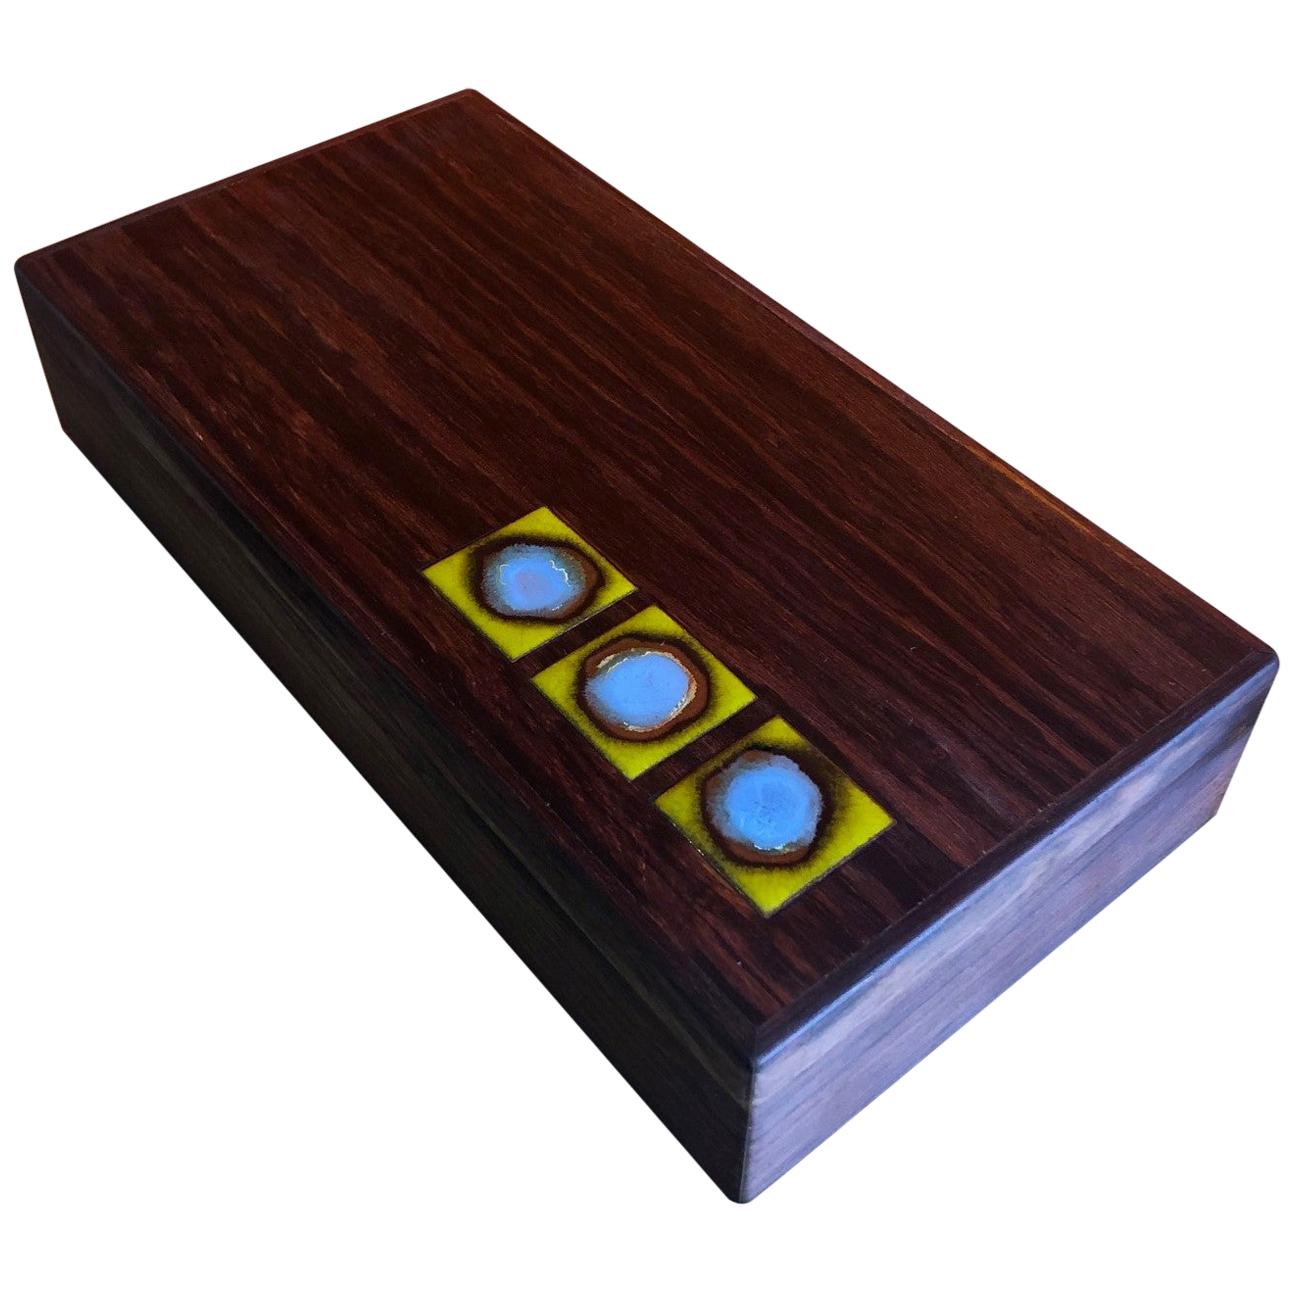 Extra Large Bodil Eje Danish Rosewood Box / Humidor by Alfred Klitgaard